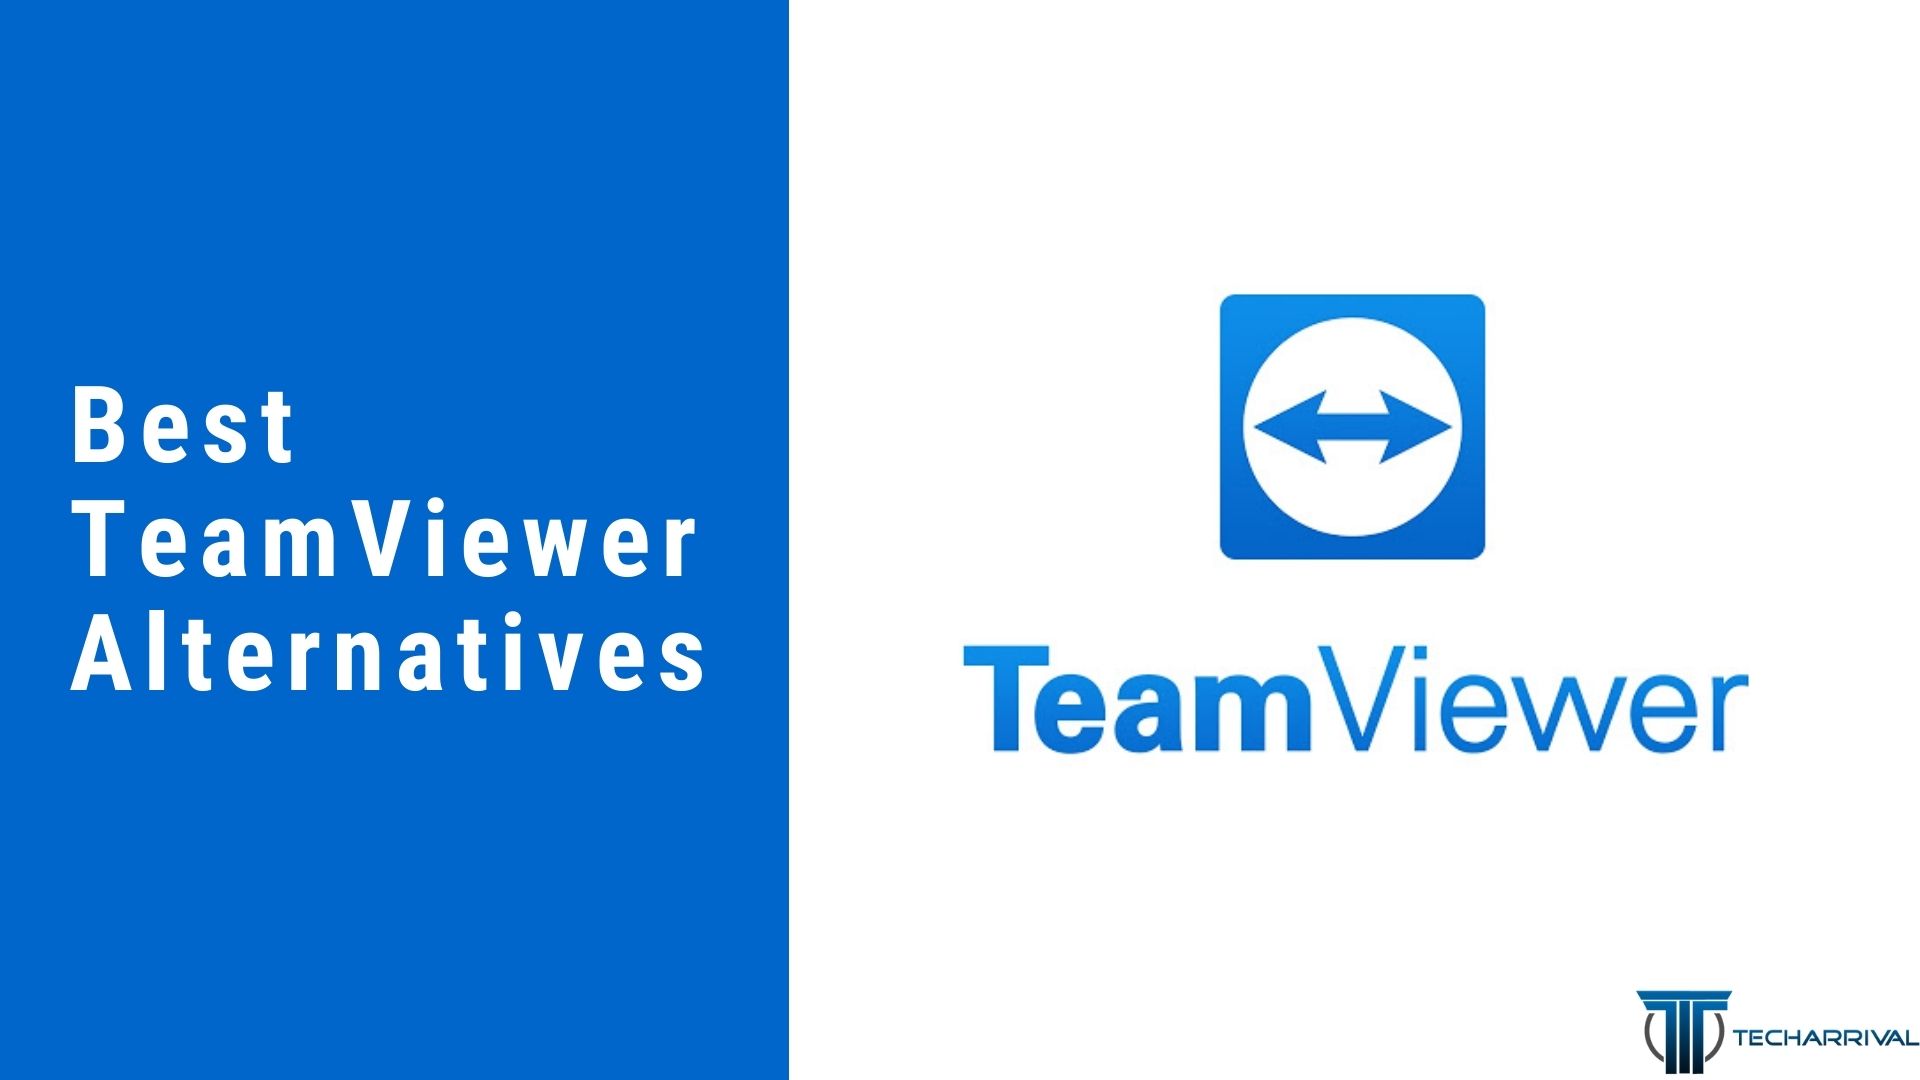 Alternatives to teamviewer reddit how to use zoom online without downloading